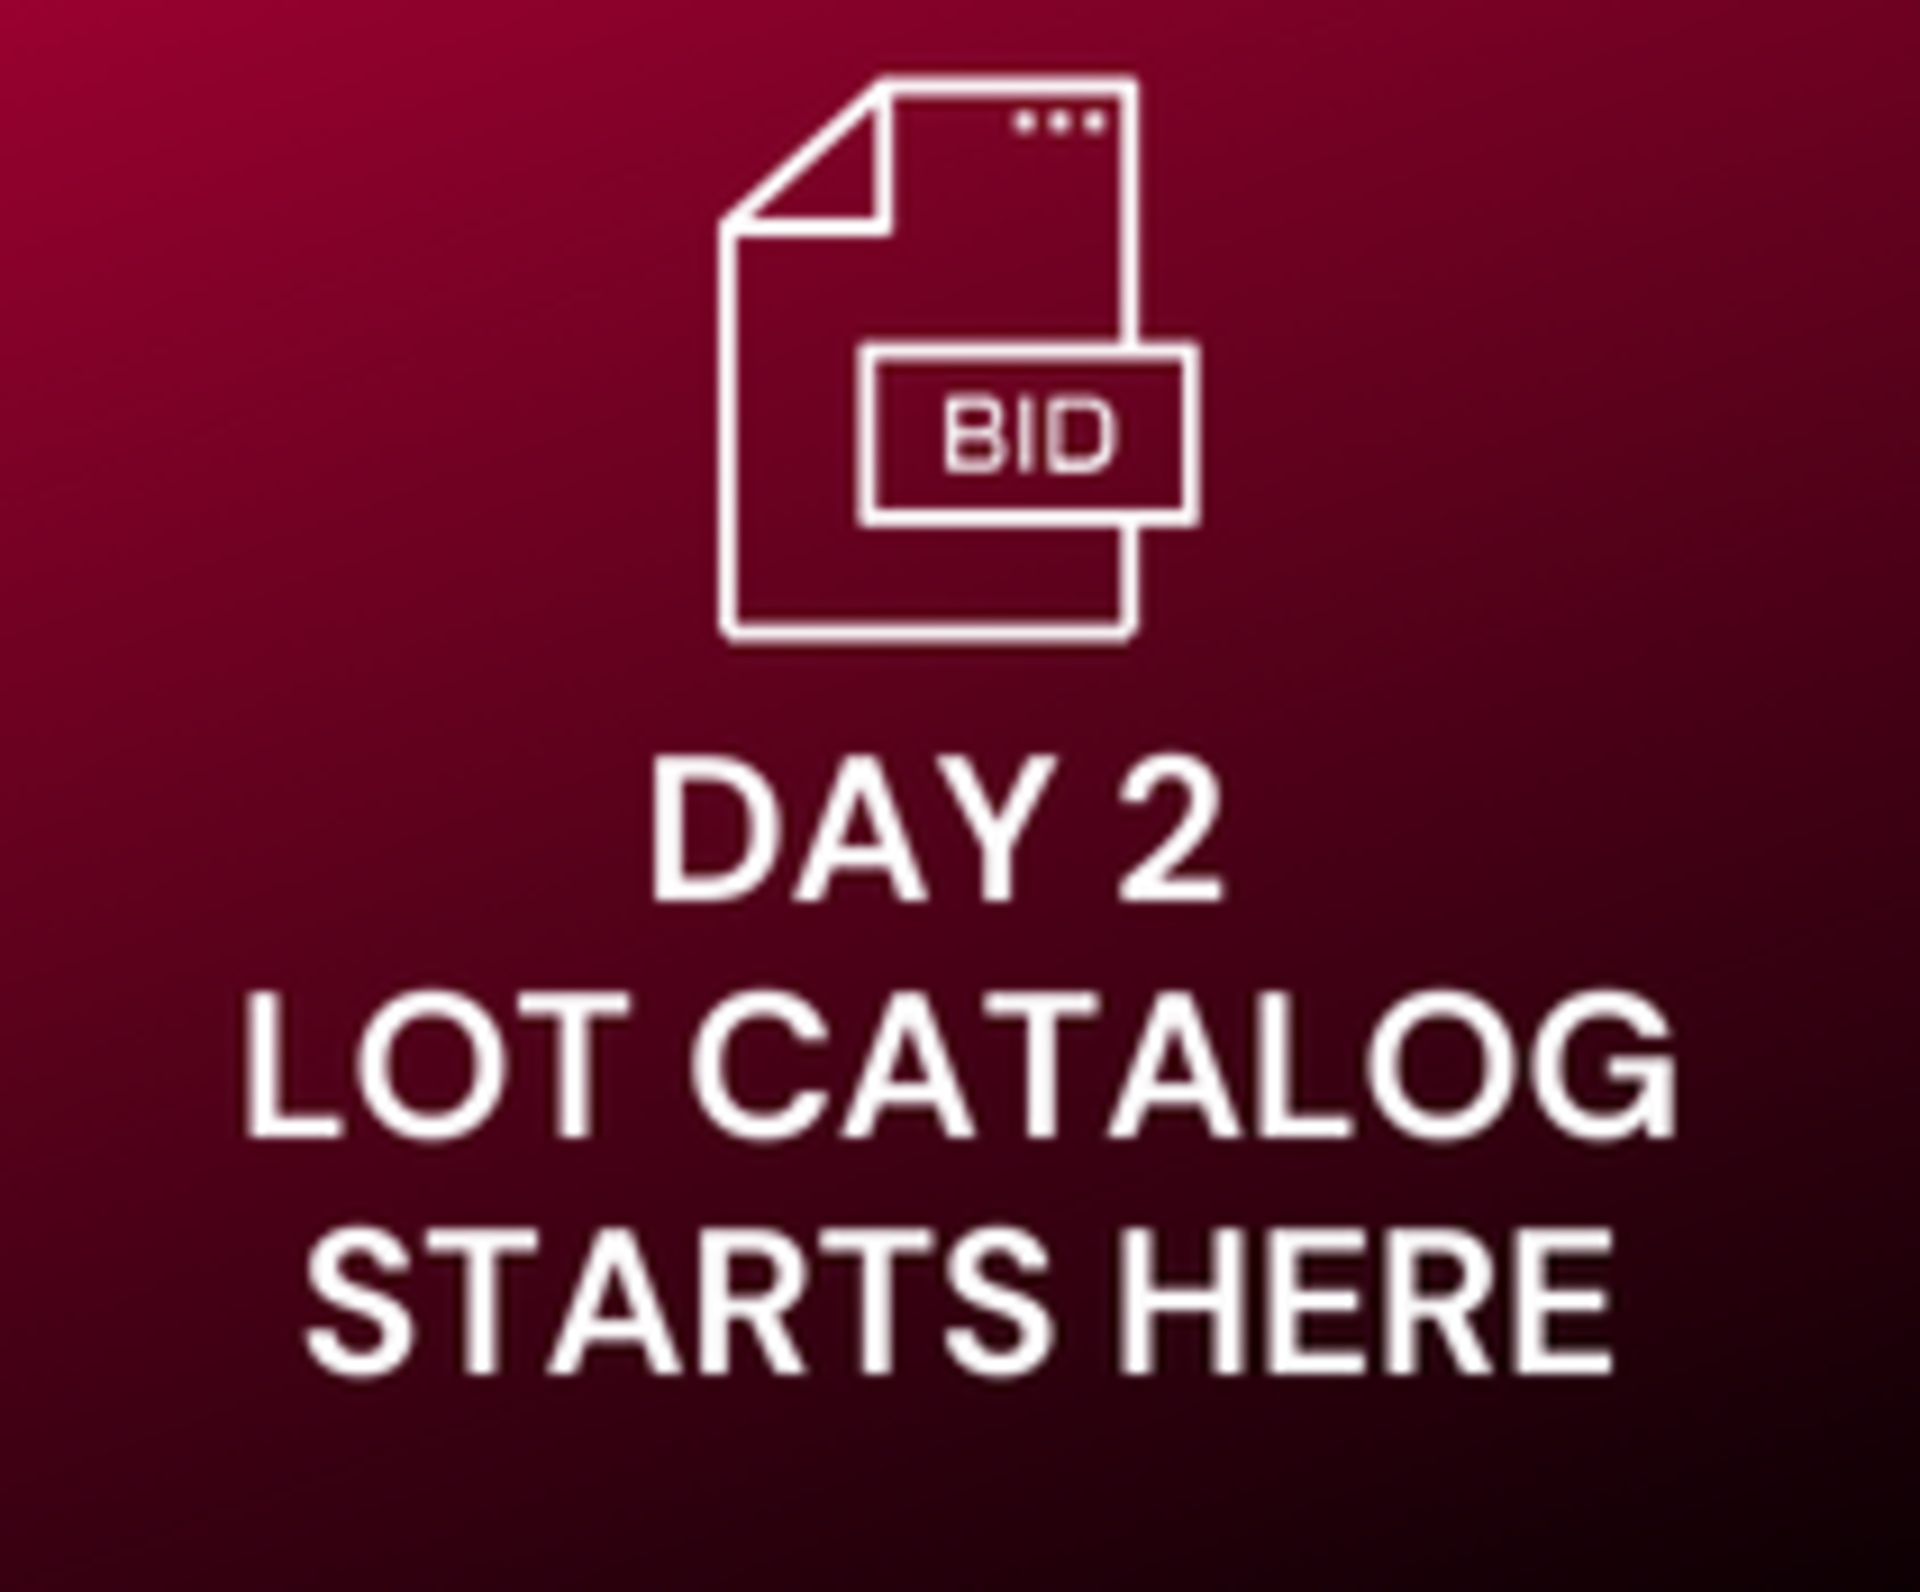 DAY 2 LOT CATALOG STARTS HERE